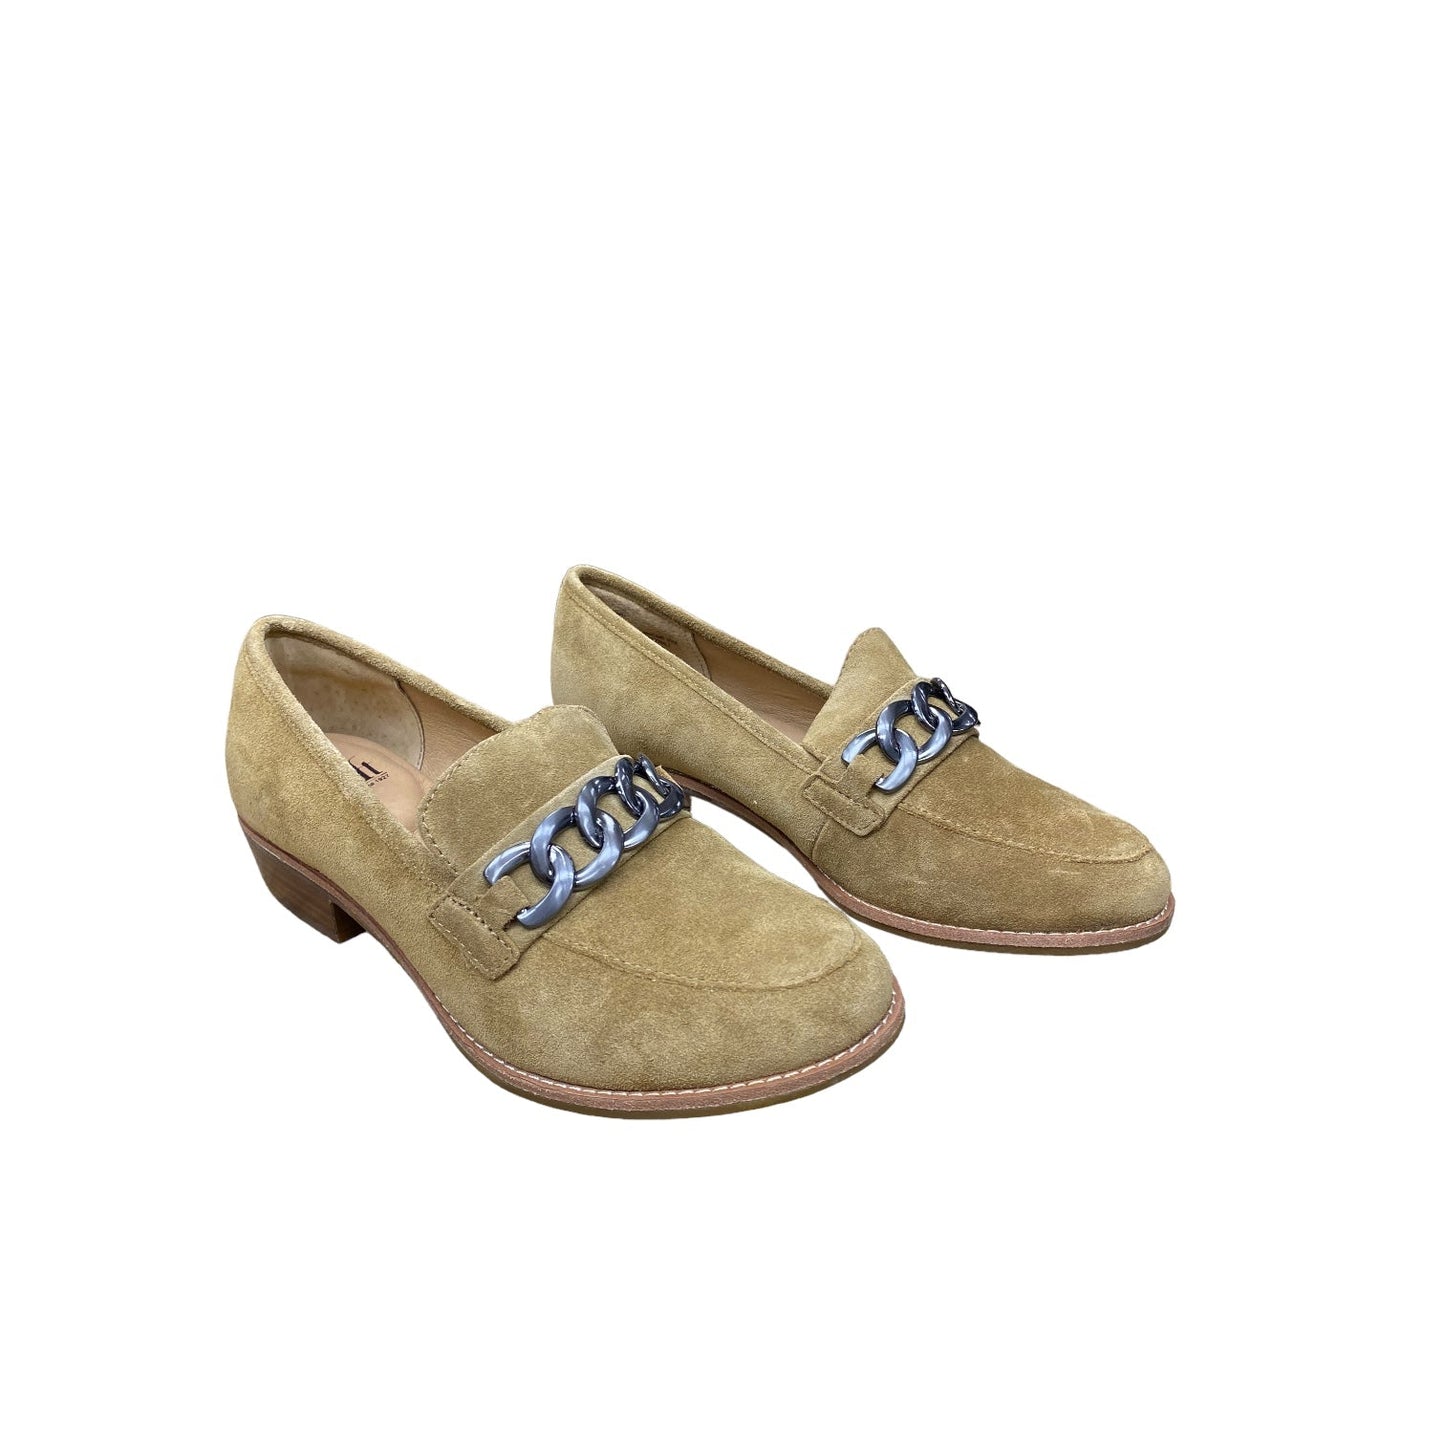 Shoes Flats By Sofft  Size: 7.5